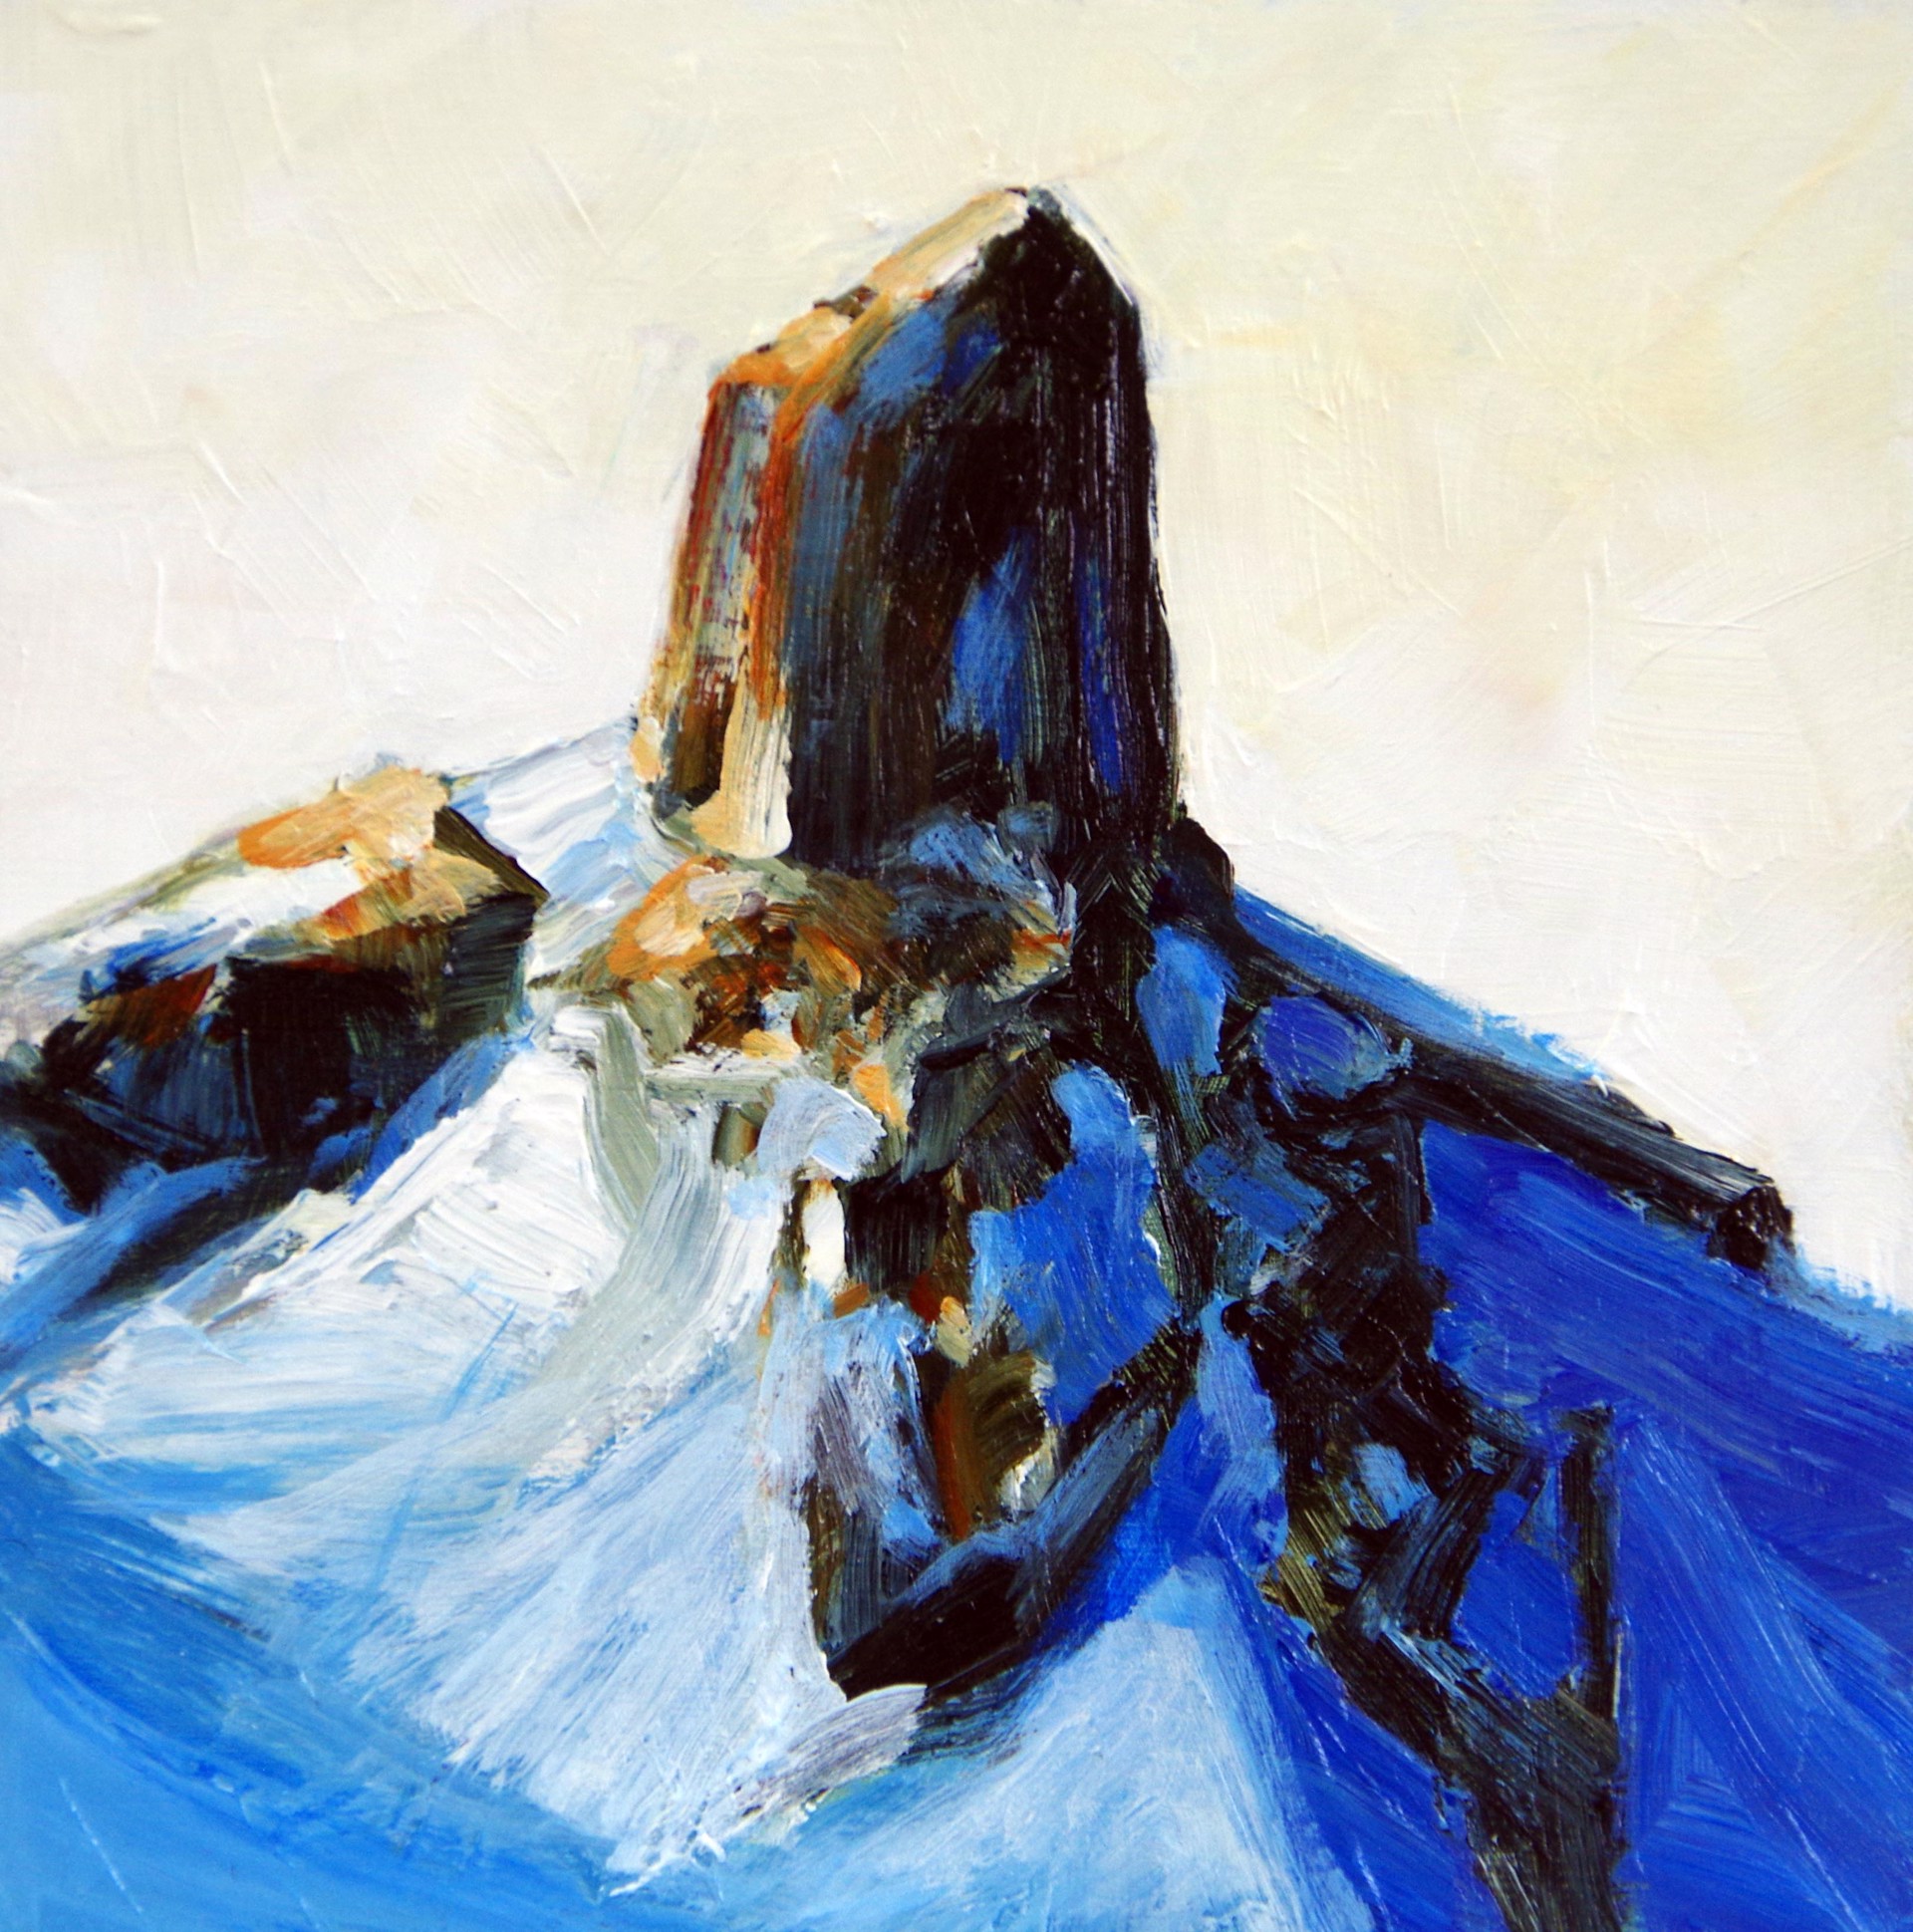 Study in Blue- Black Tusk #2 by SUSIE CIPOLLA